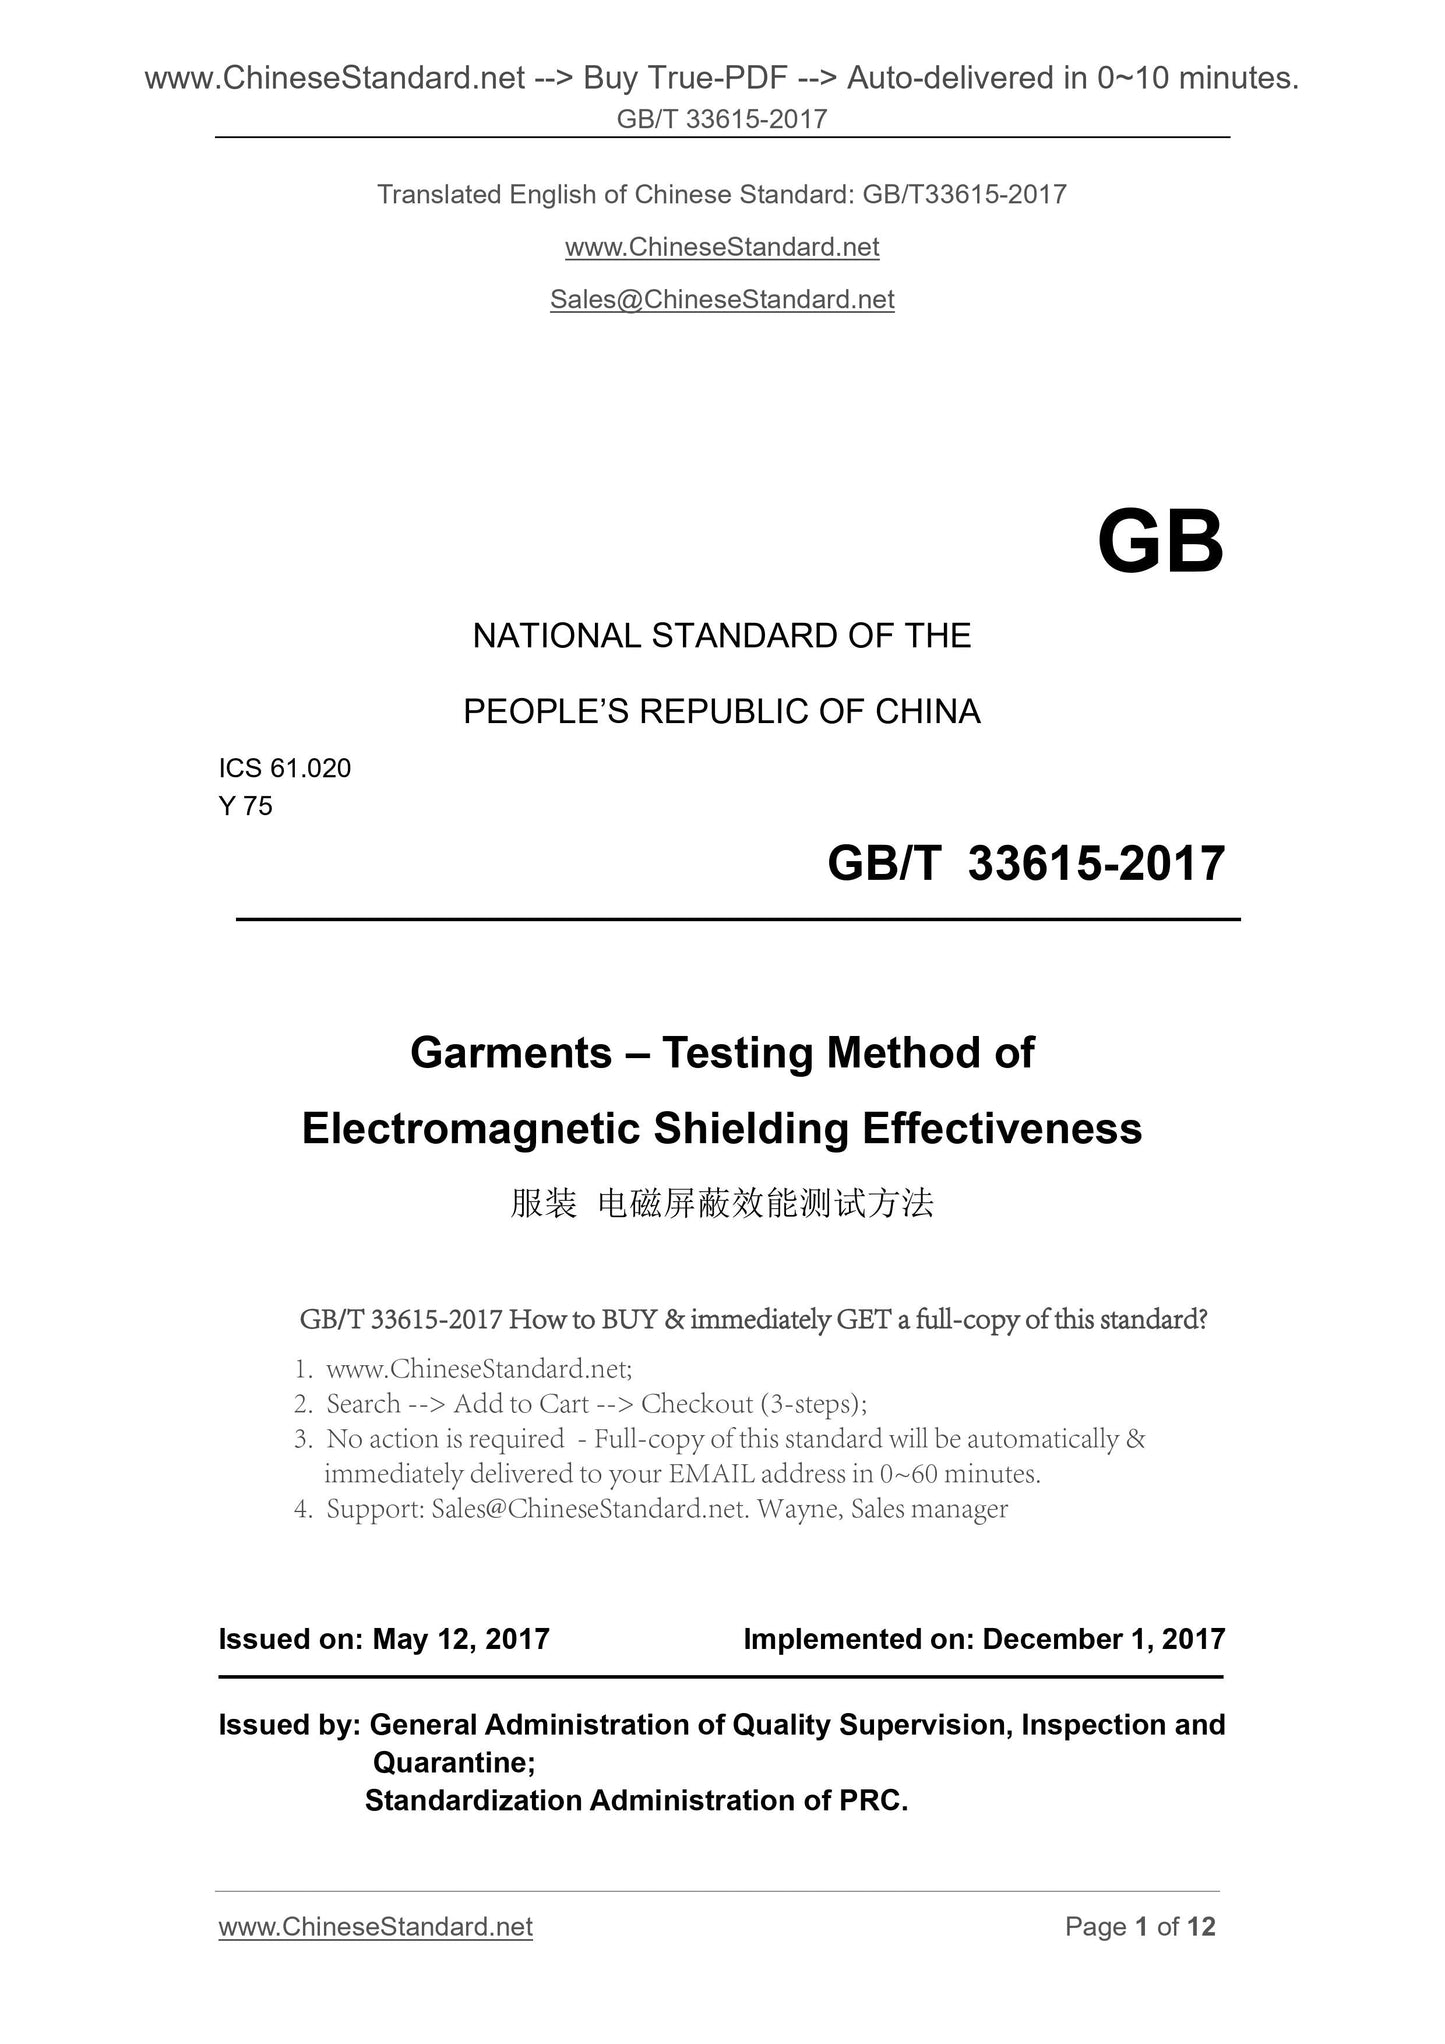 GB/T 33615-2017 Page 1